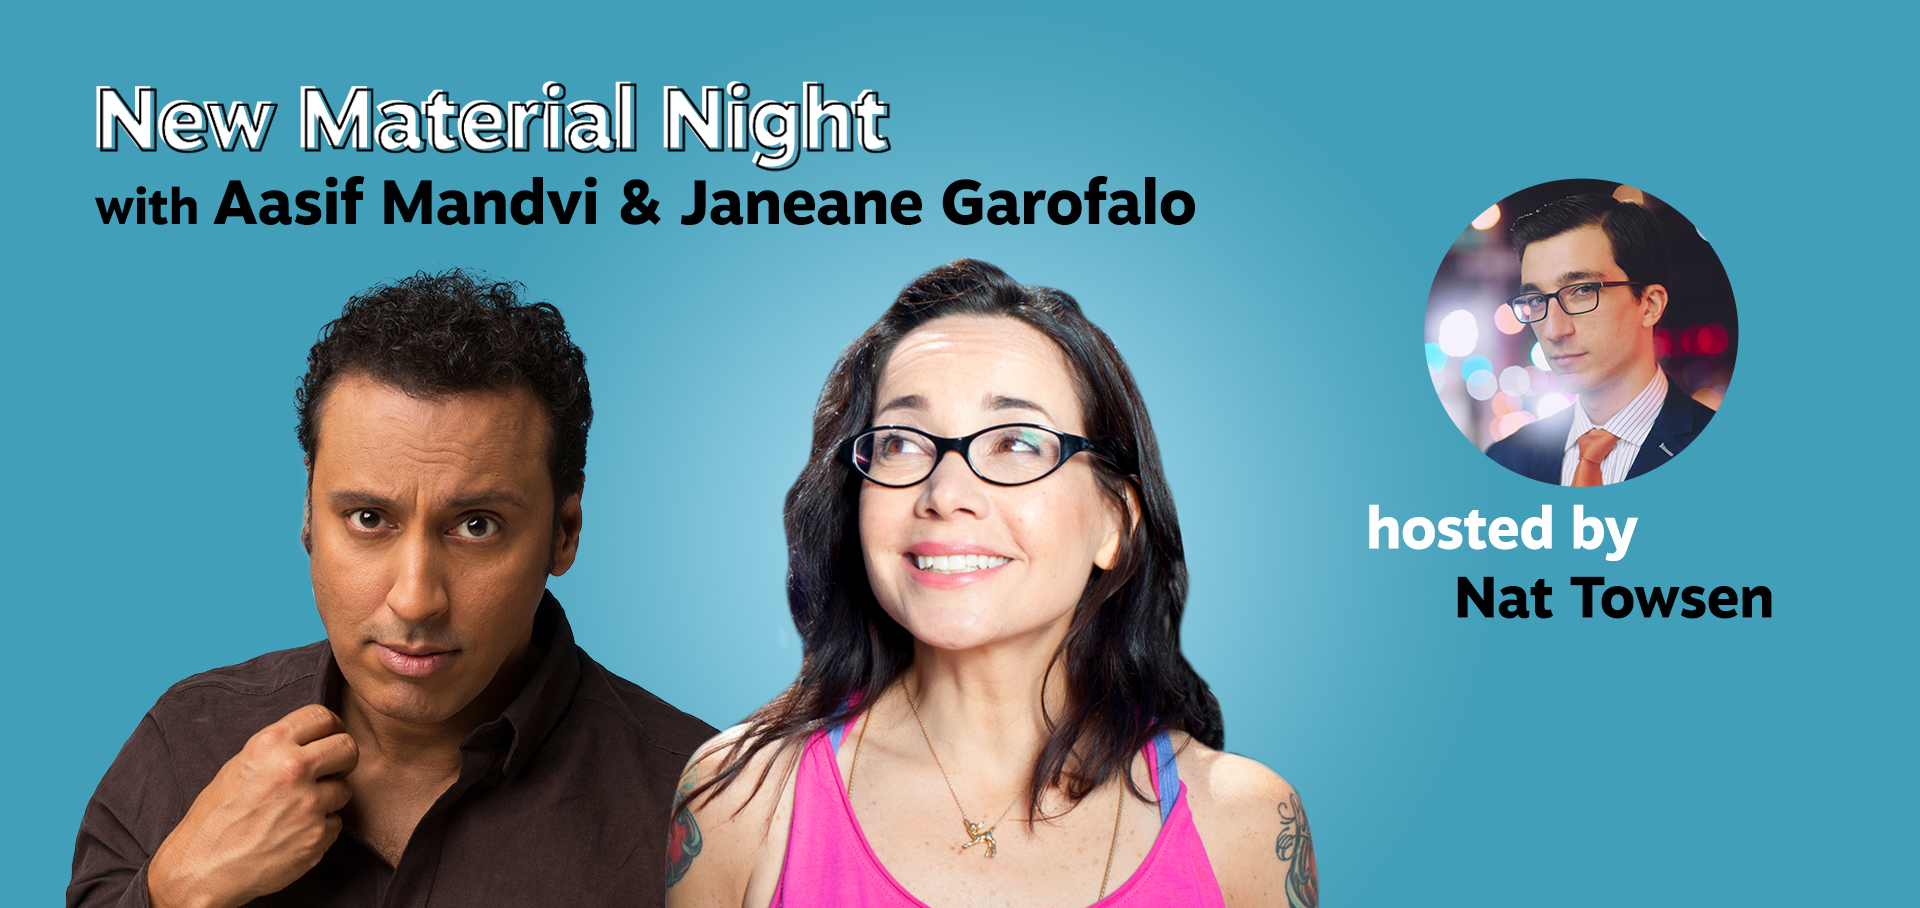 New Material Night with Janeane Garofalo, Aasif Mandvi, and host Nat Towsen